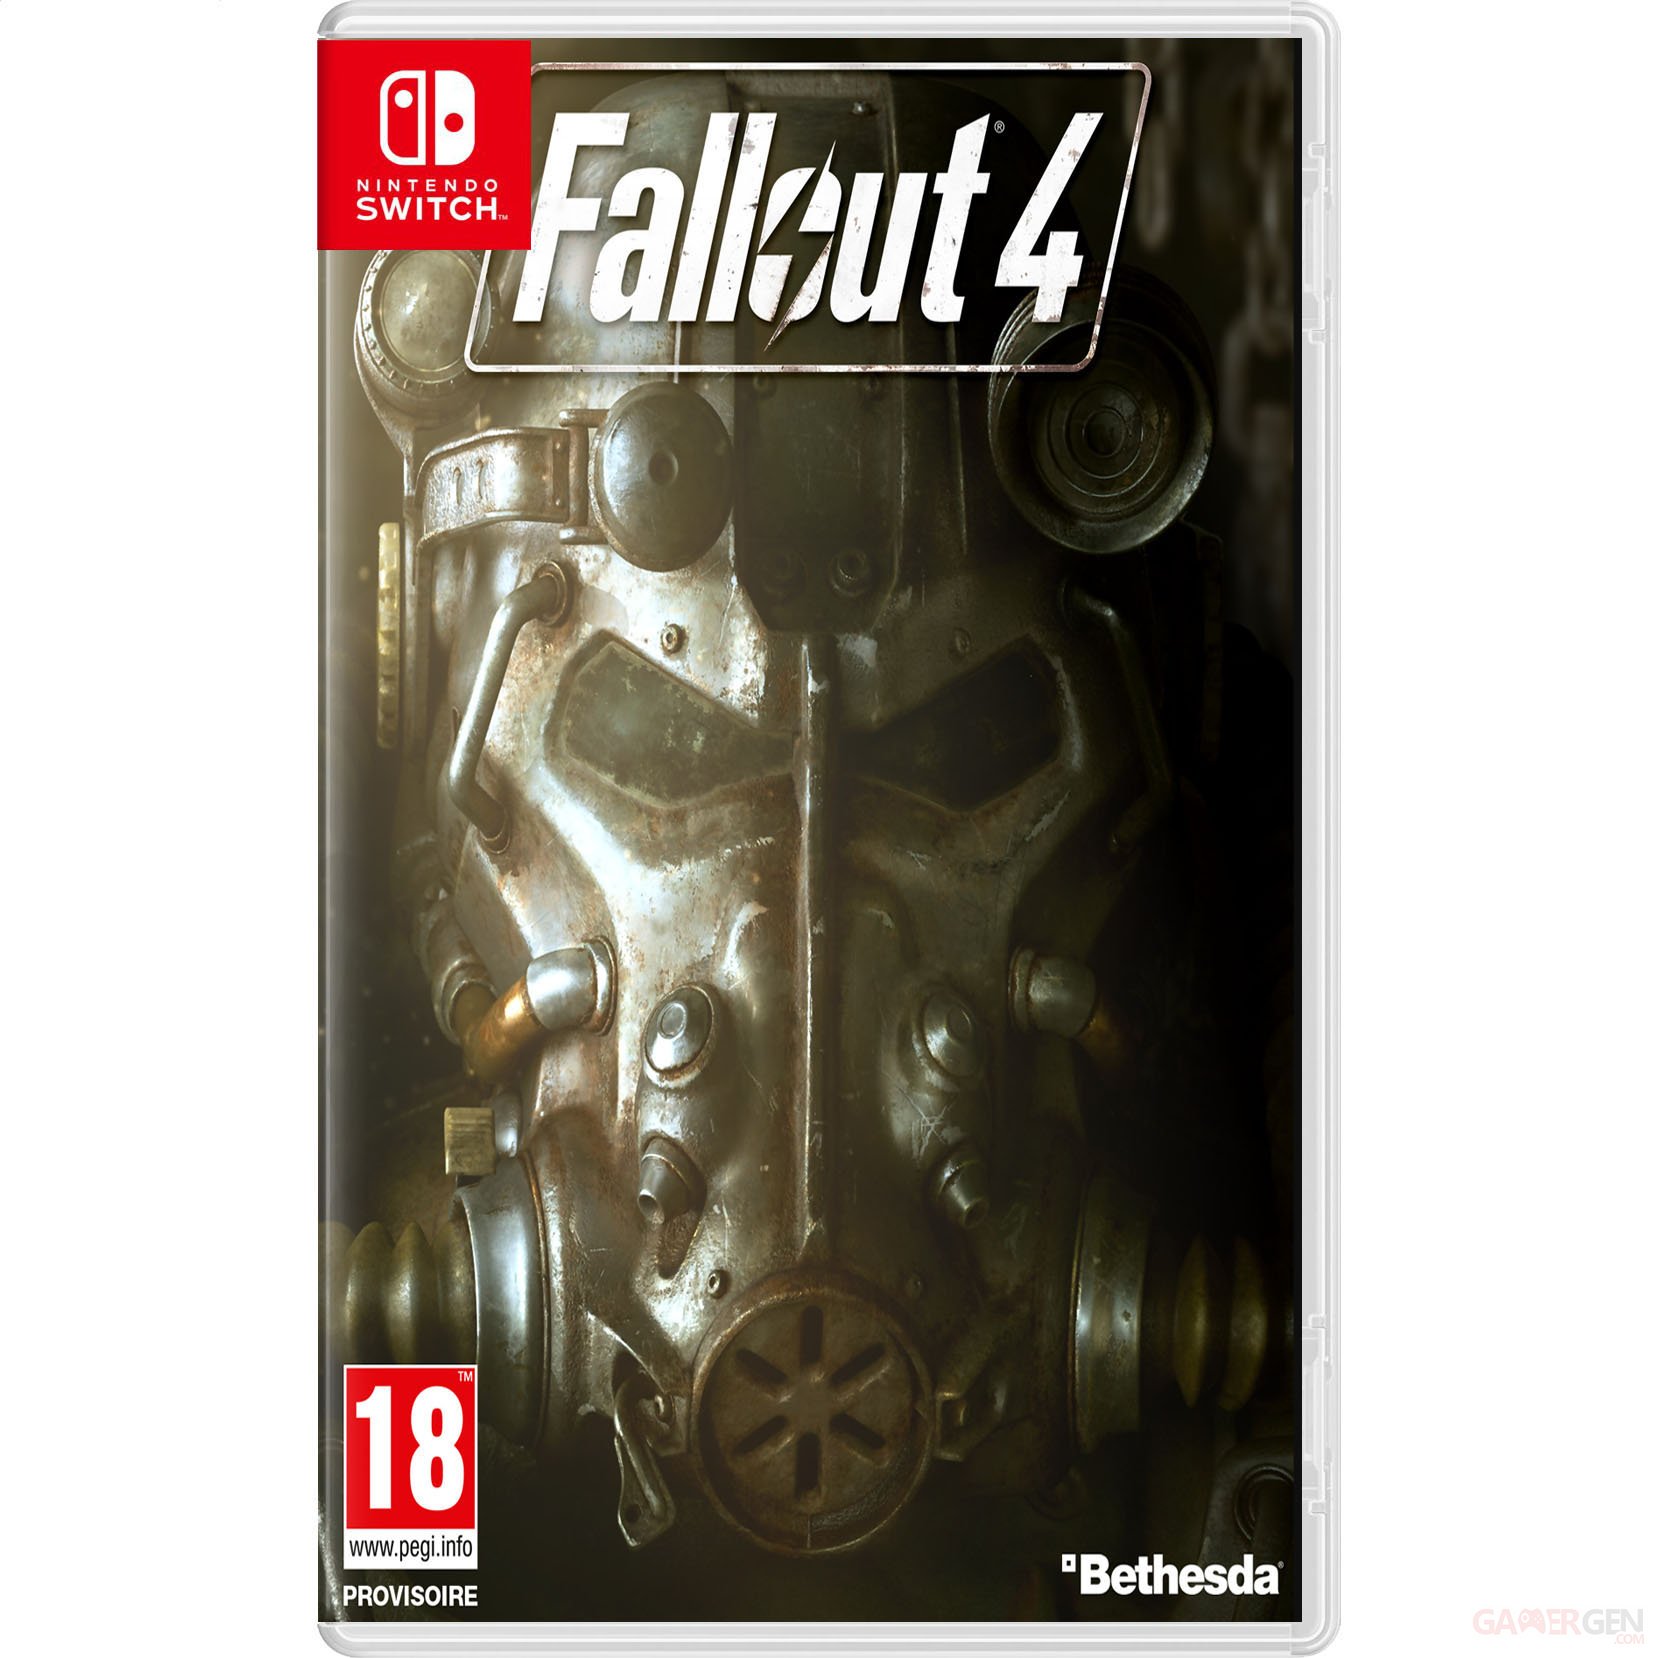 is fallout 4 on switch